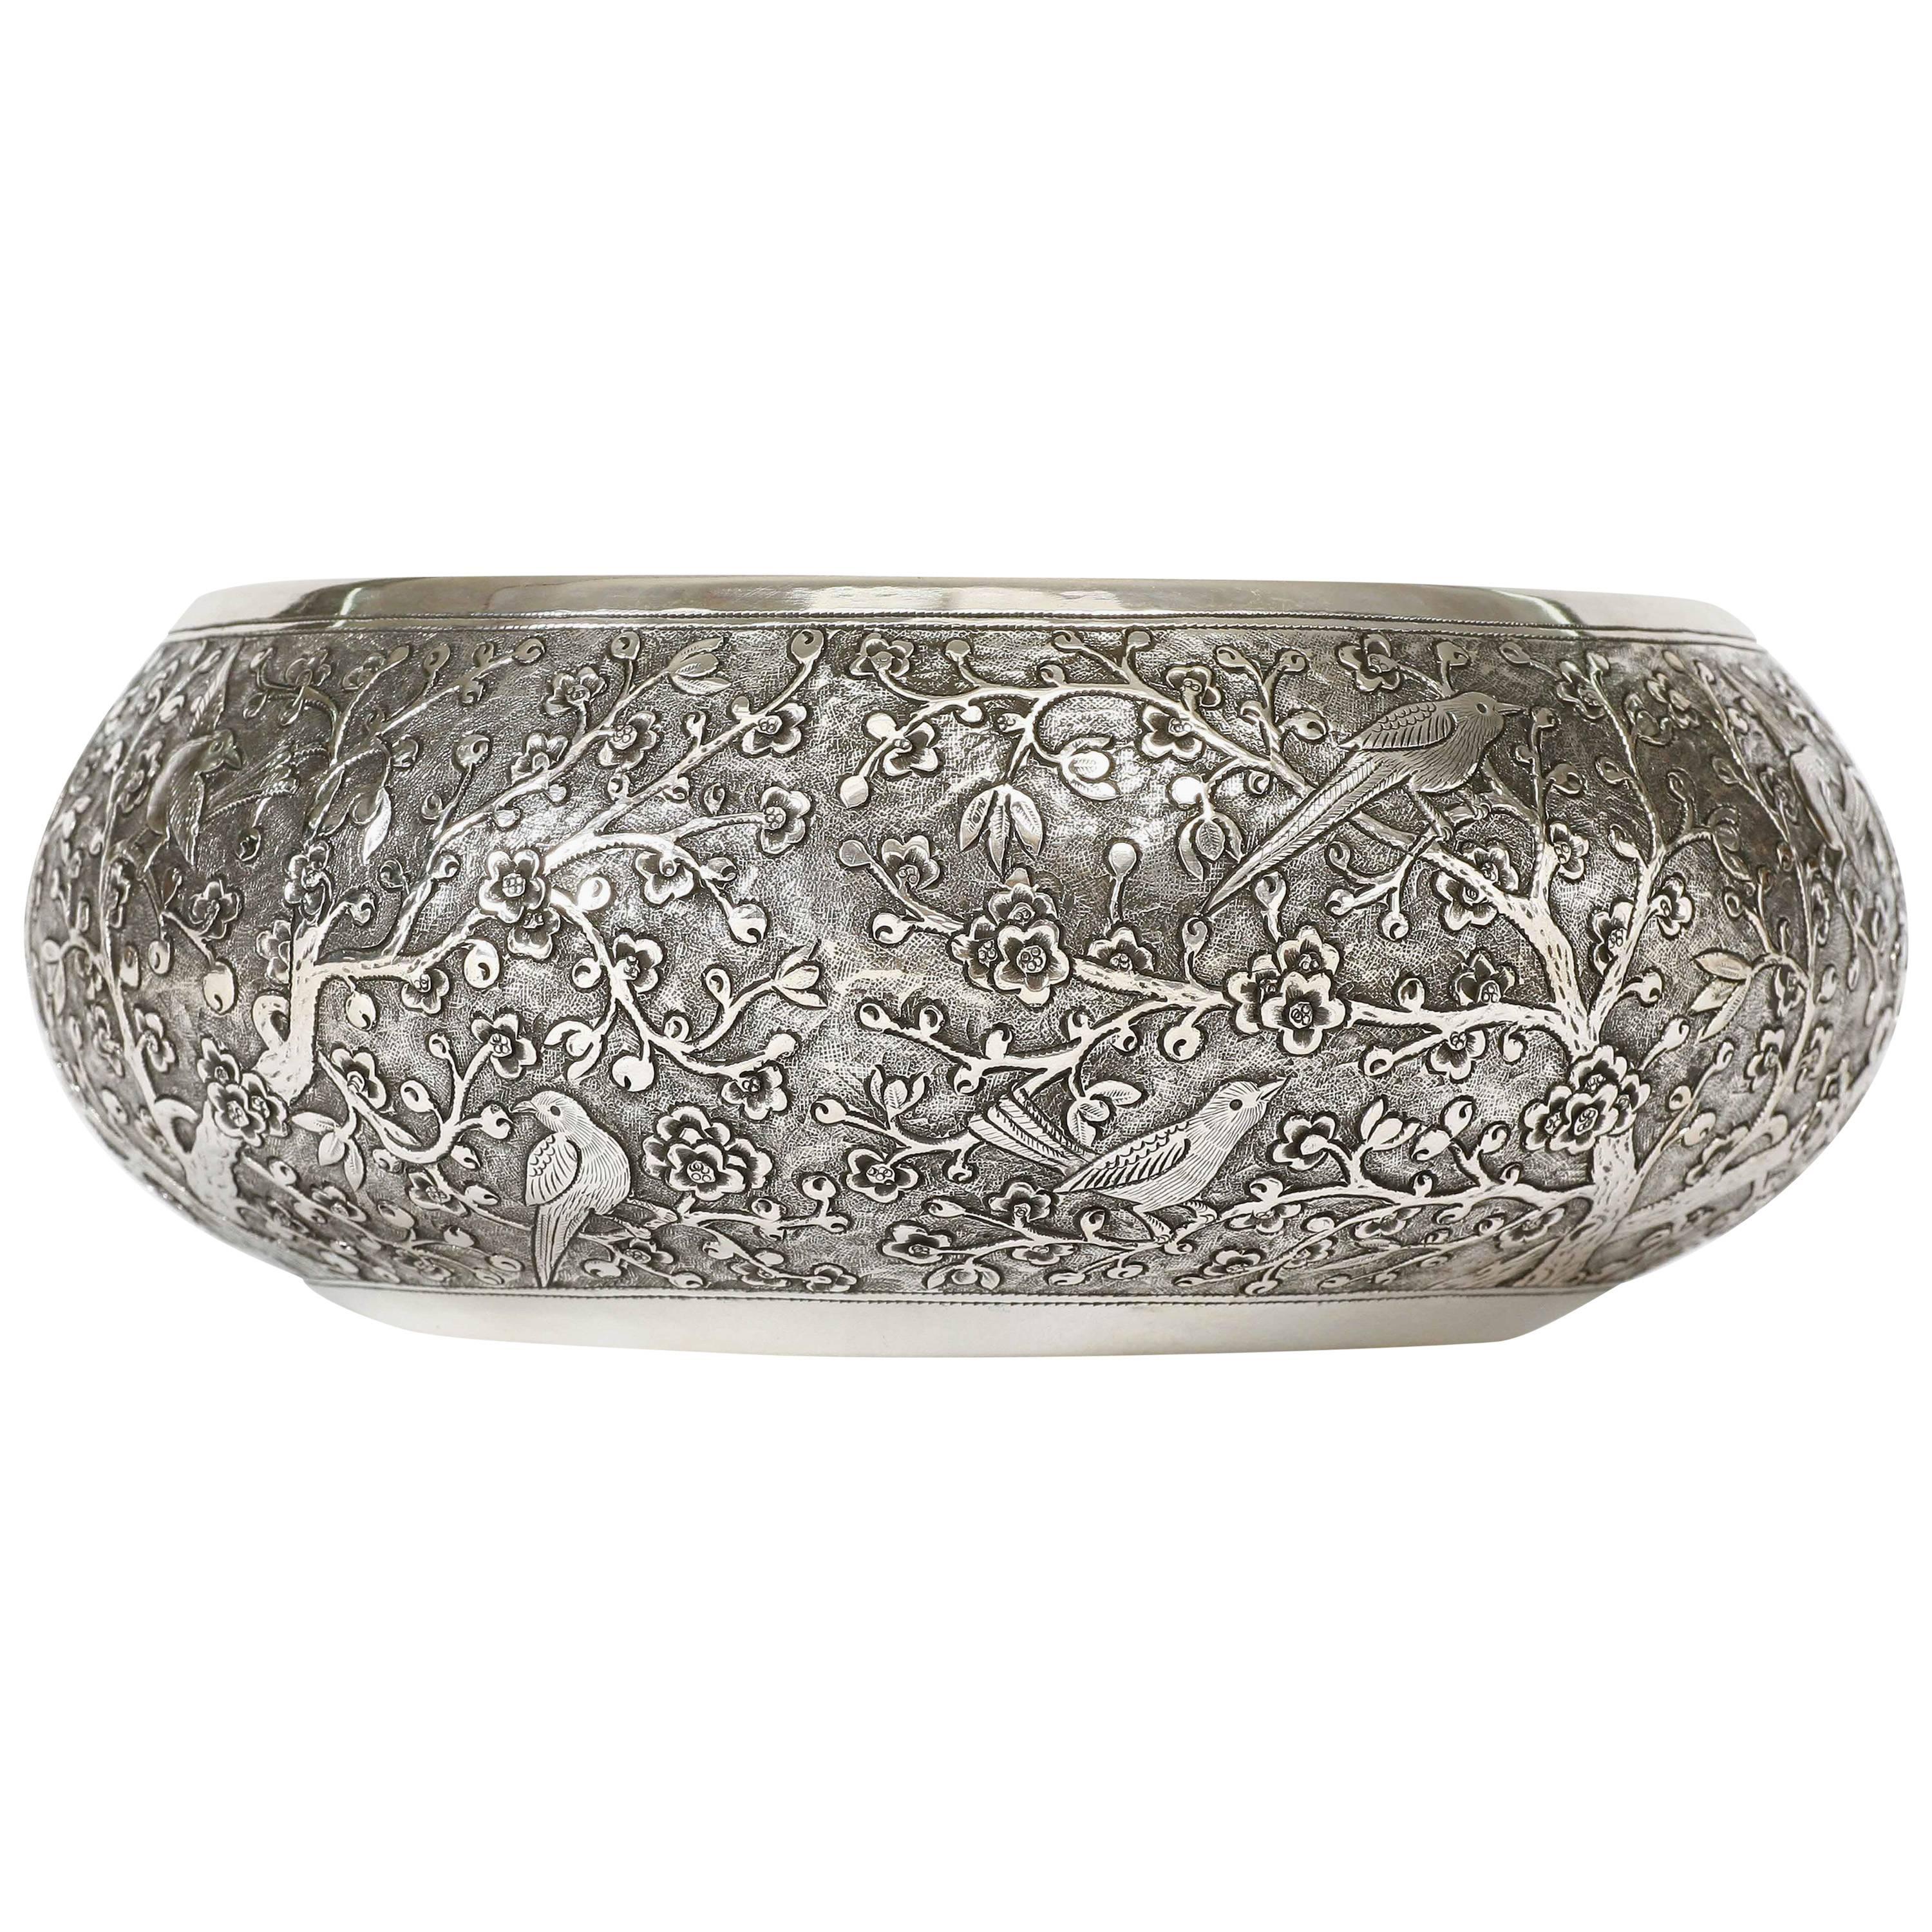 Hand-Worked Solid Silver Bowl, Chinoiserie Blossom and Birds Motif, Centrepiece